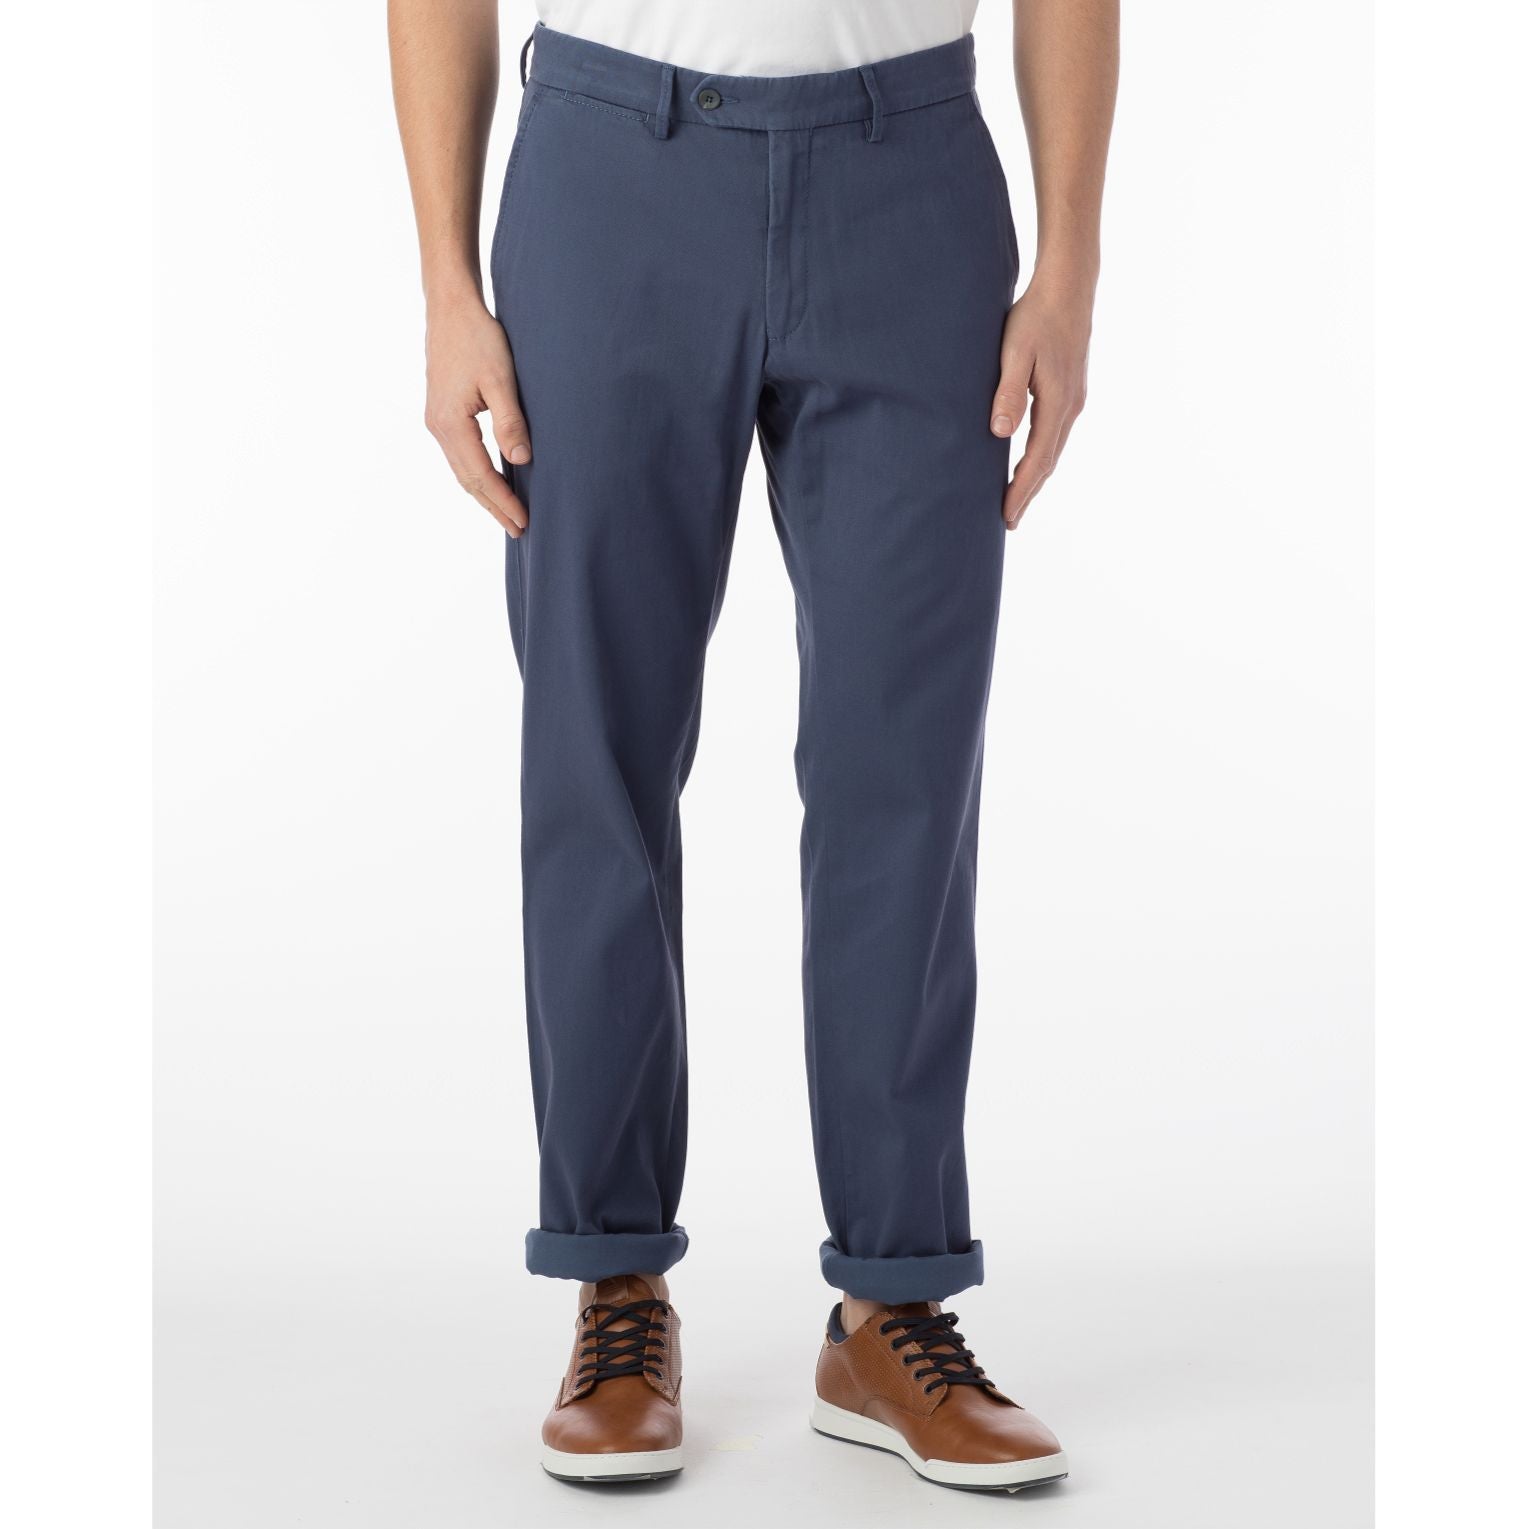 Blue Trousers Matching Color Guide | Blue trousers, Blue trousers outfit, Blue  trousers outfit men